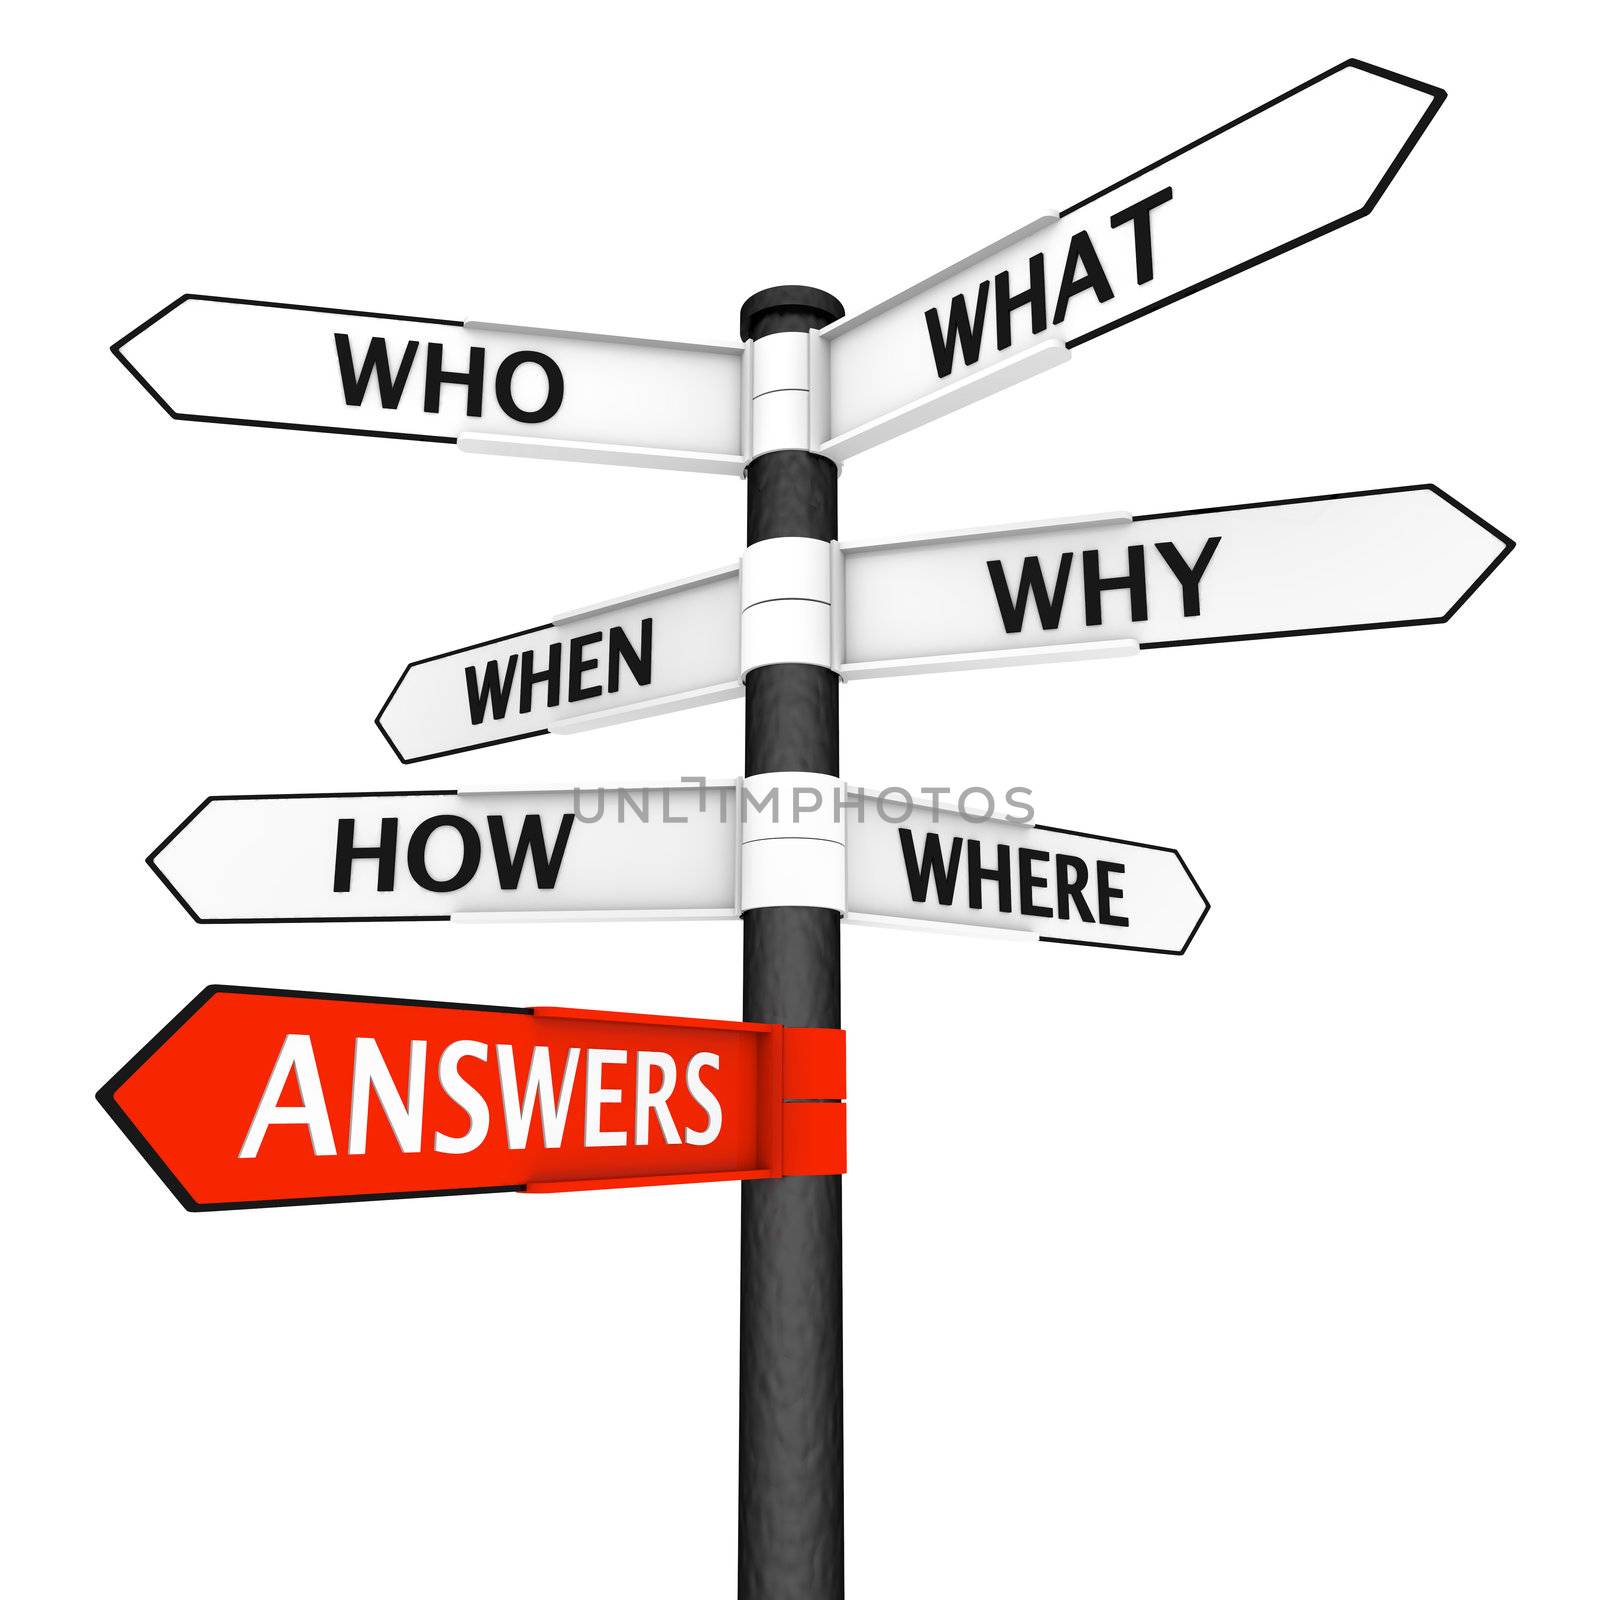 Questions and Answers Signpost by Harvepino